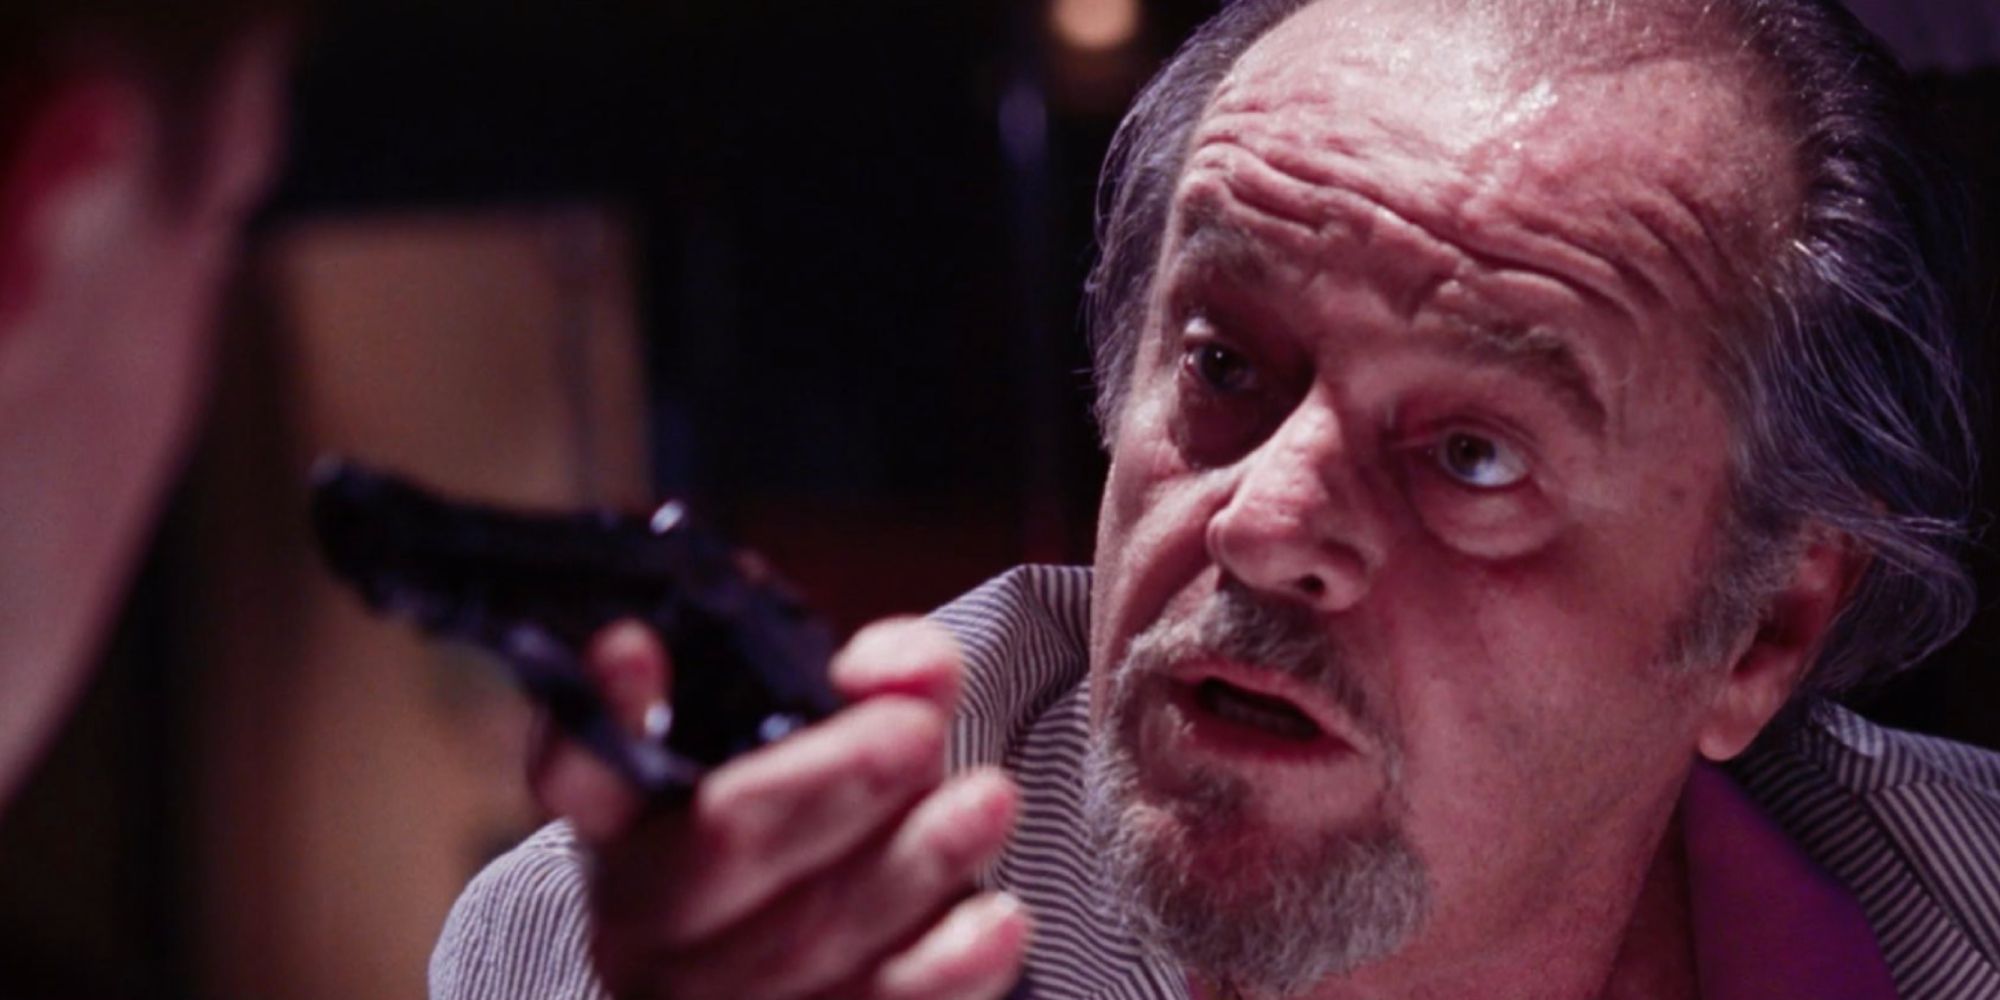 Jack Nicholson as Frank Costello pointing his gun at a person offscreen in The Departed